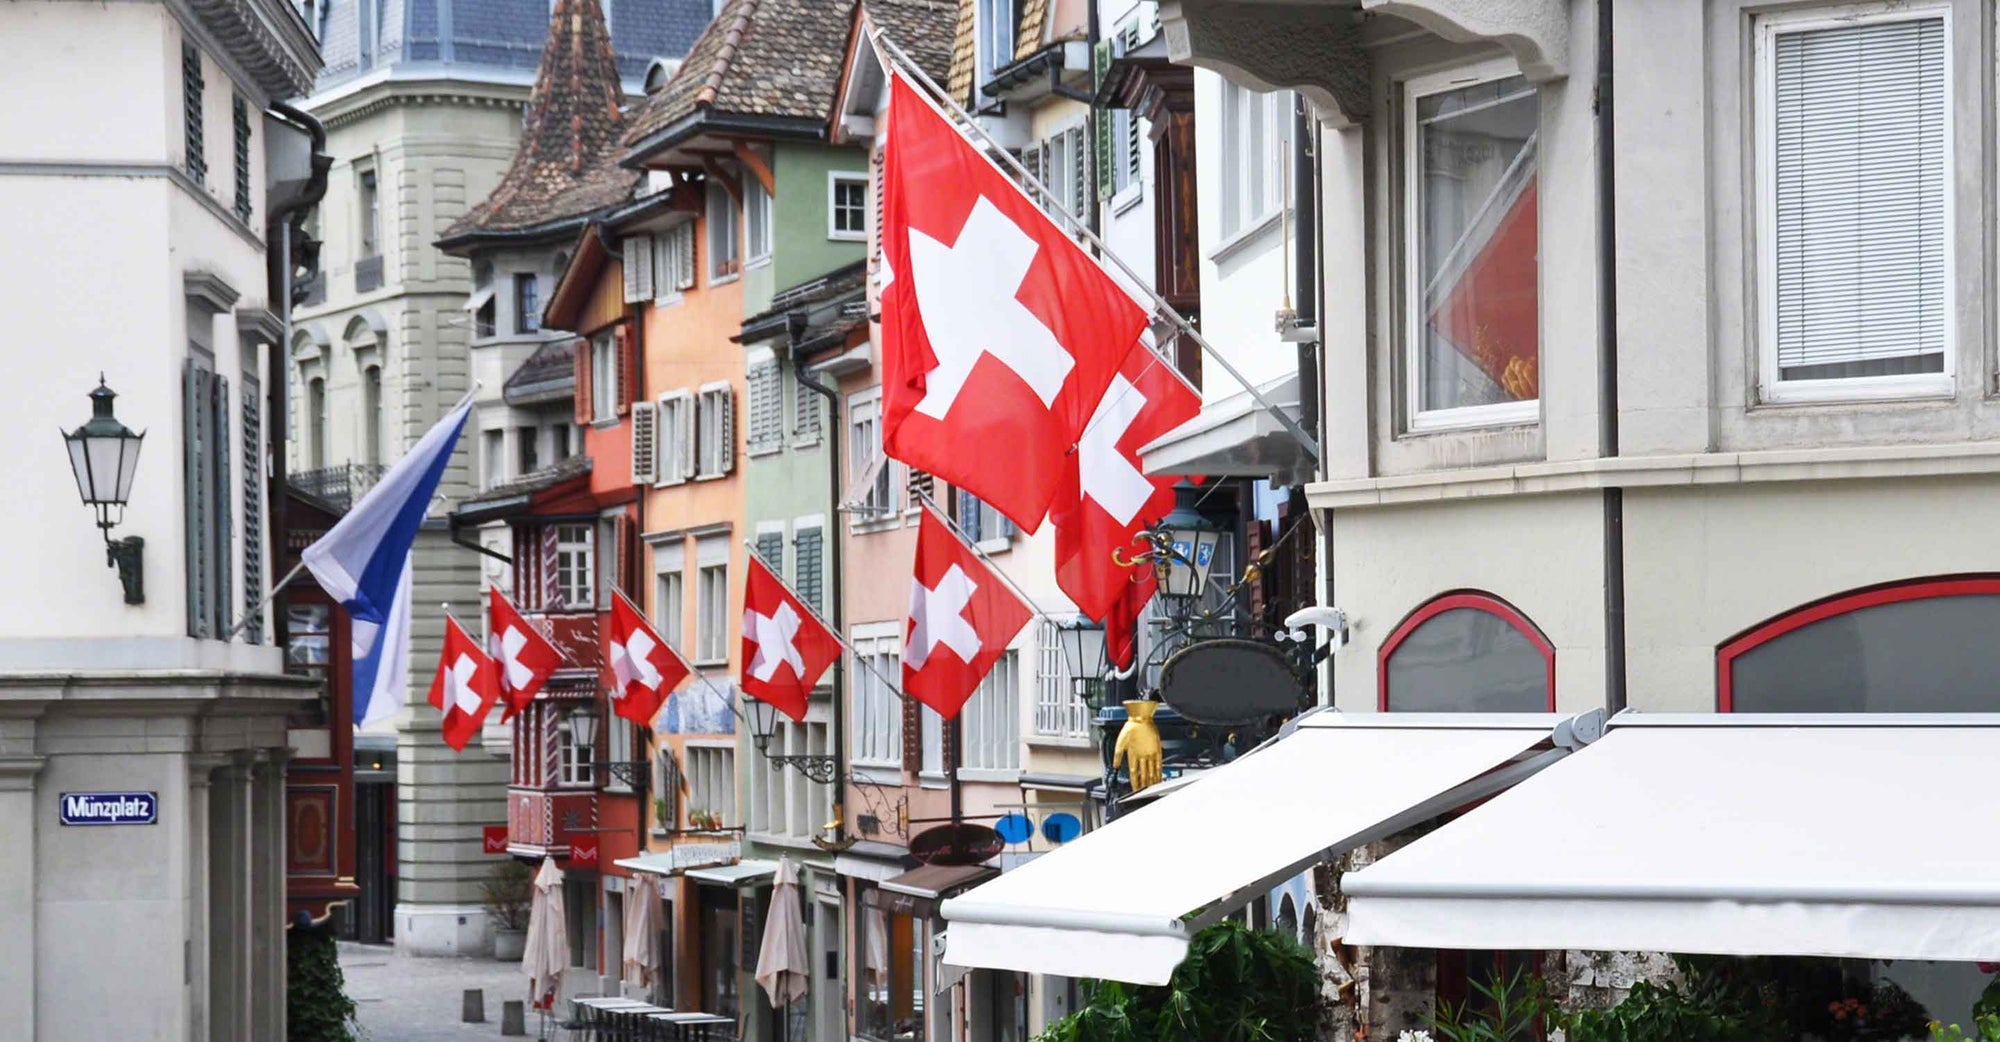 Swiss flags hanging on buildings